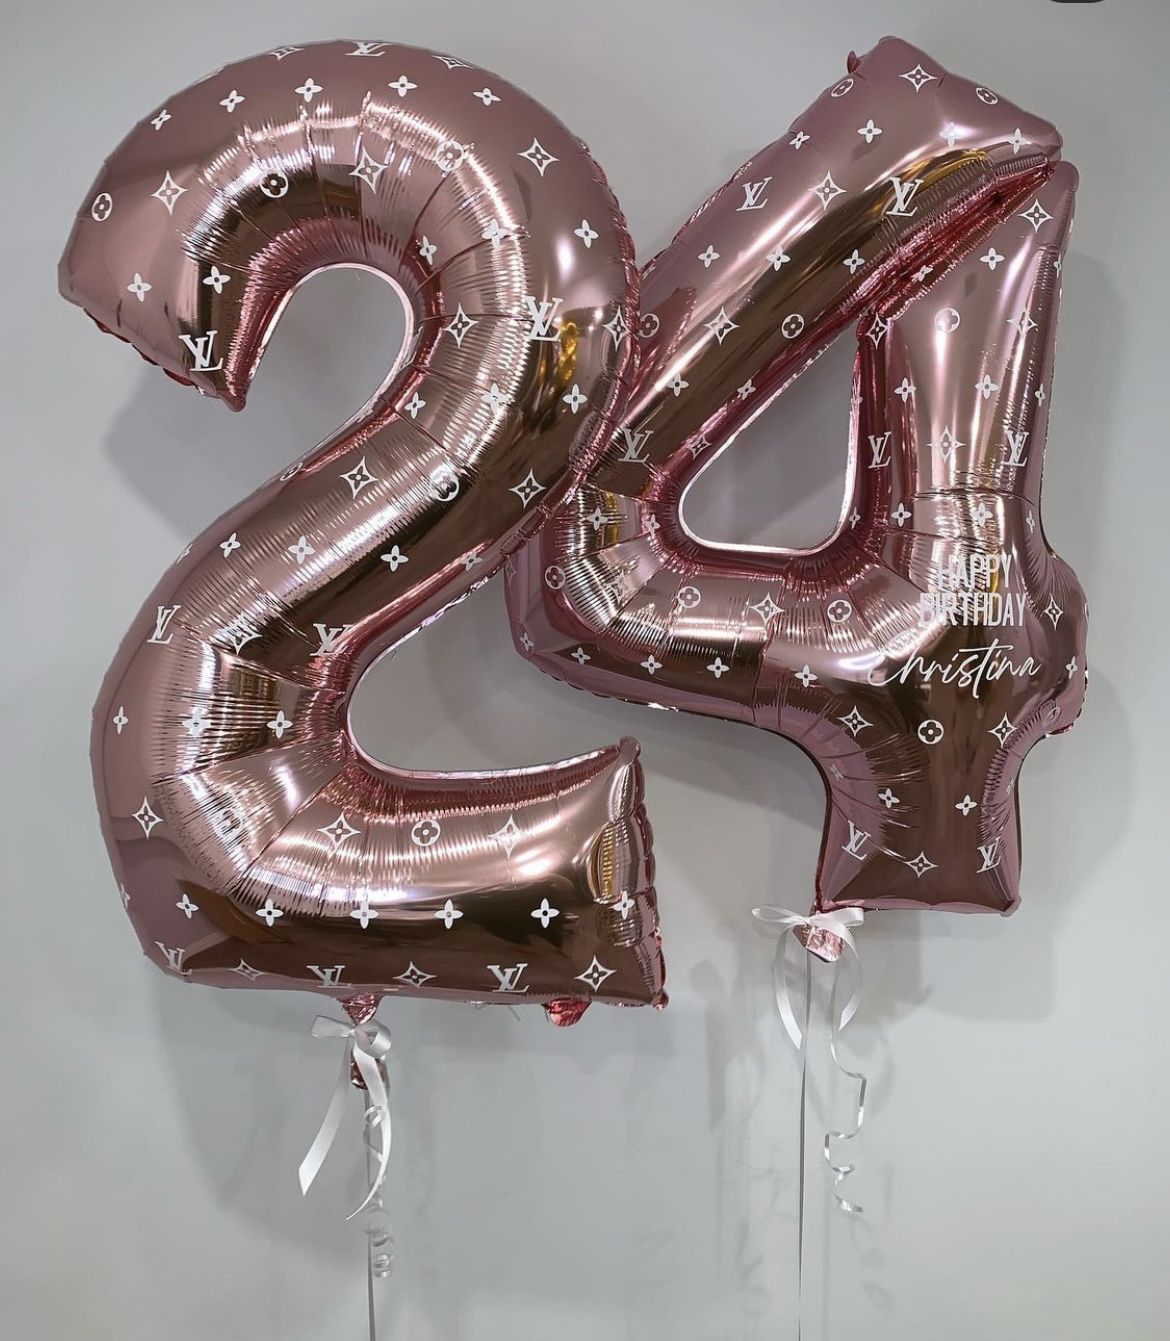 L V BALLOONS FOR ALL OCCASIONS!